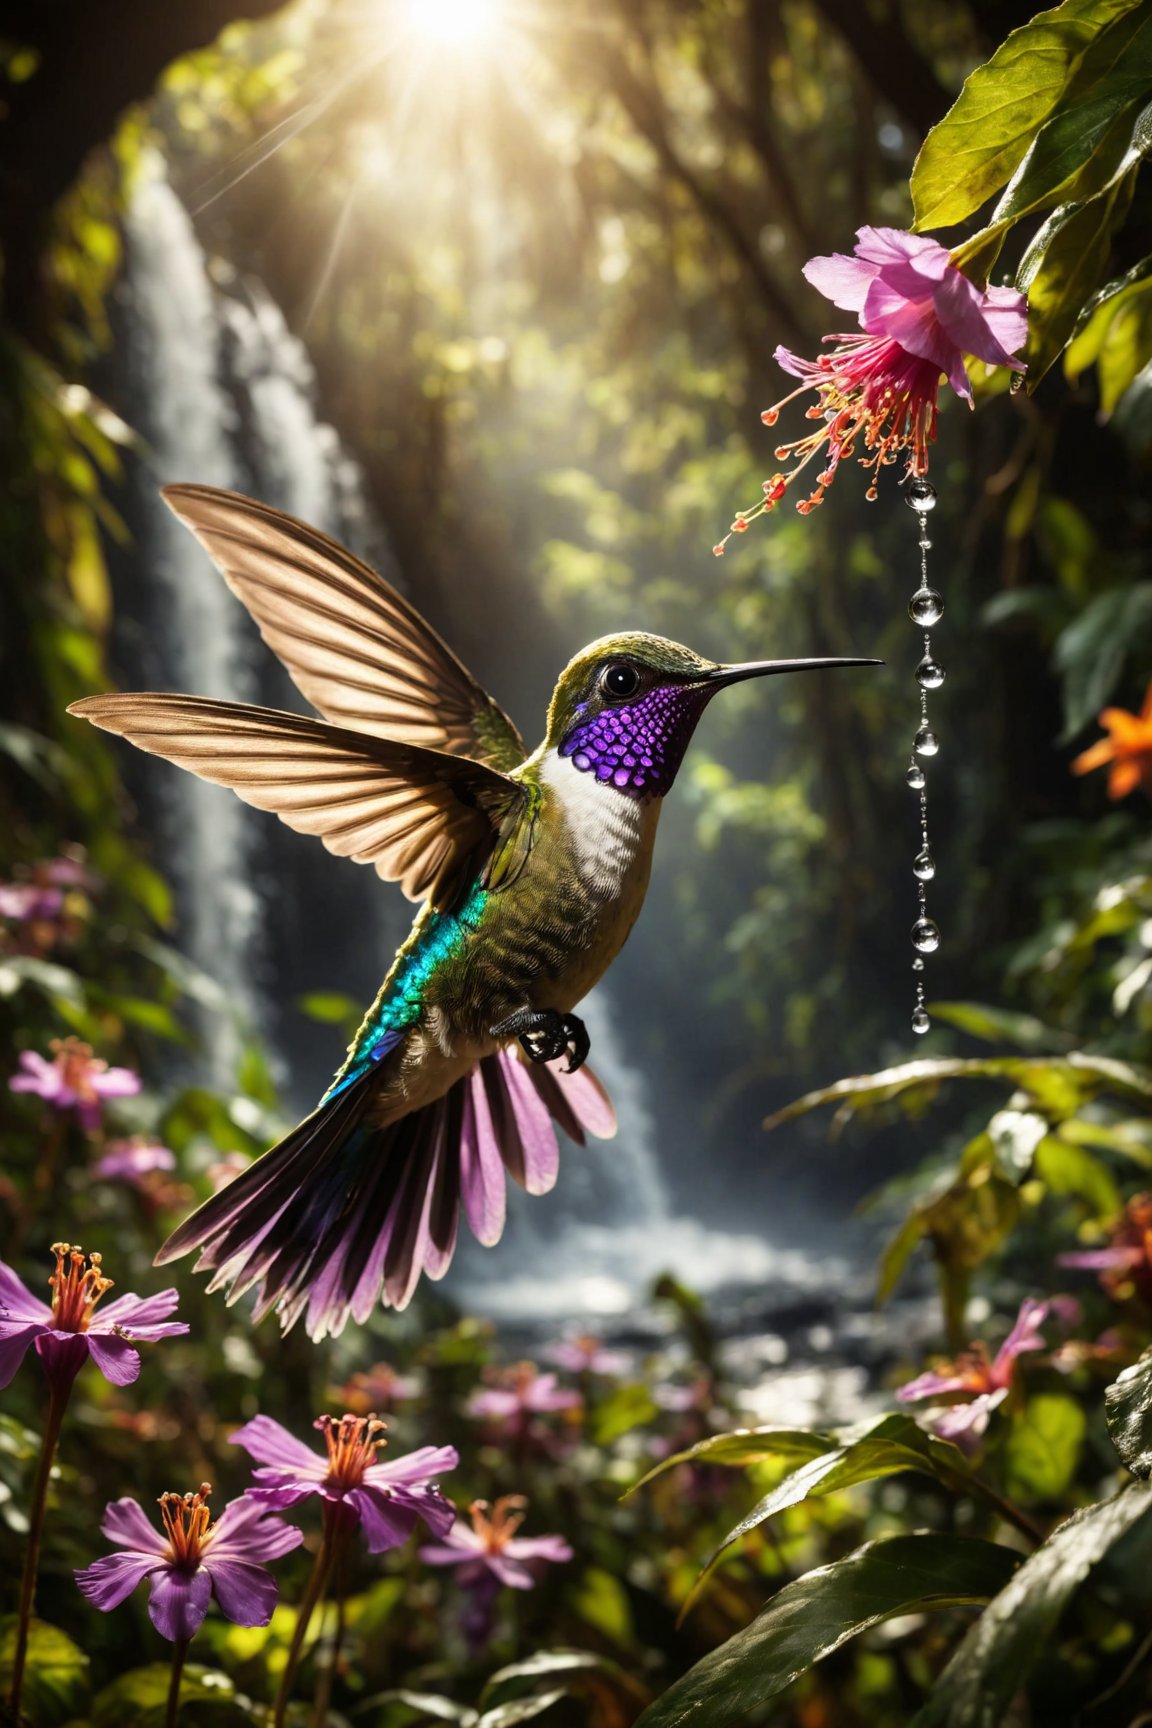 Capture an incredibly detailed and high-resolution photograph of a Violet-crowned nymph hummingbird in its natural habitat. The scene is set in a lush, vibrant rainforest during the golden hour, with beams of sunlight piercing through the dense foliage, casting a warm, cinematic glow. The nymph is mid-flight, wings a blur, hovering near a cluster of bright, blooming flowers. Dewdrops glisten on the petals, and the background features a cascading waterfall, adding a dynamic and dramatic element to the composition. The sharp details and vivid colors immerse viewers in the breathtaking beauty and wonder of this enchanting moment in nature